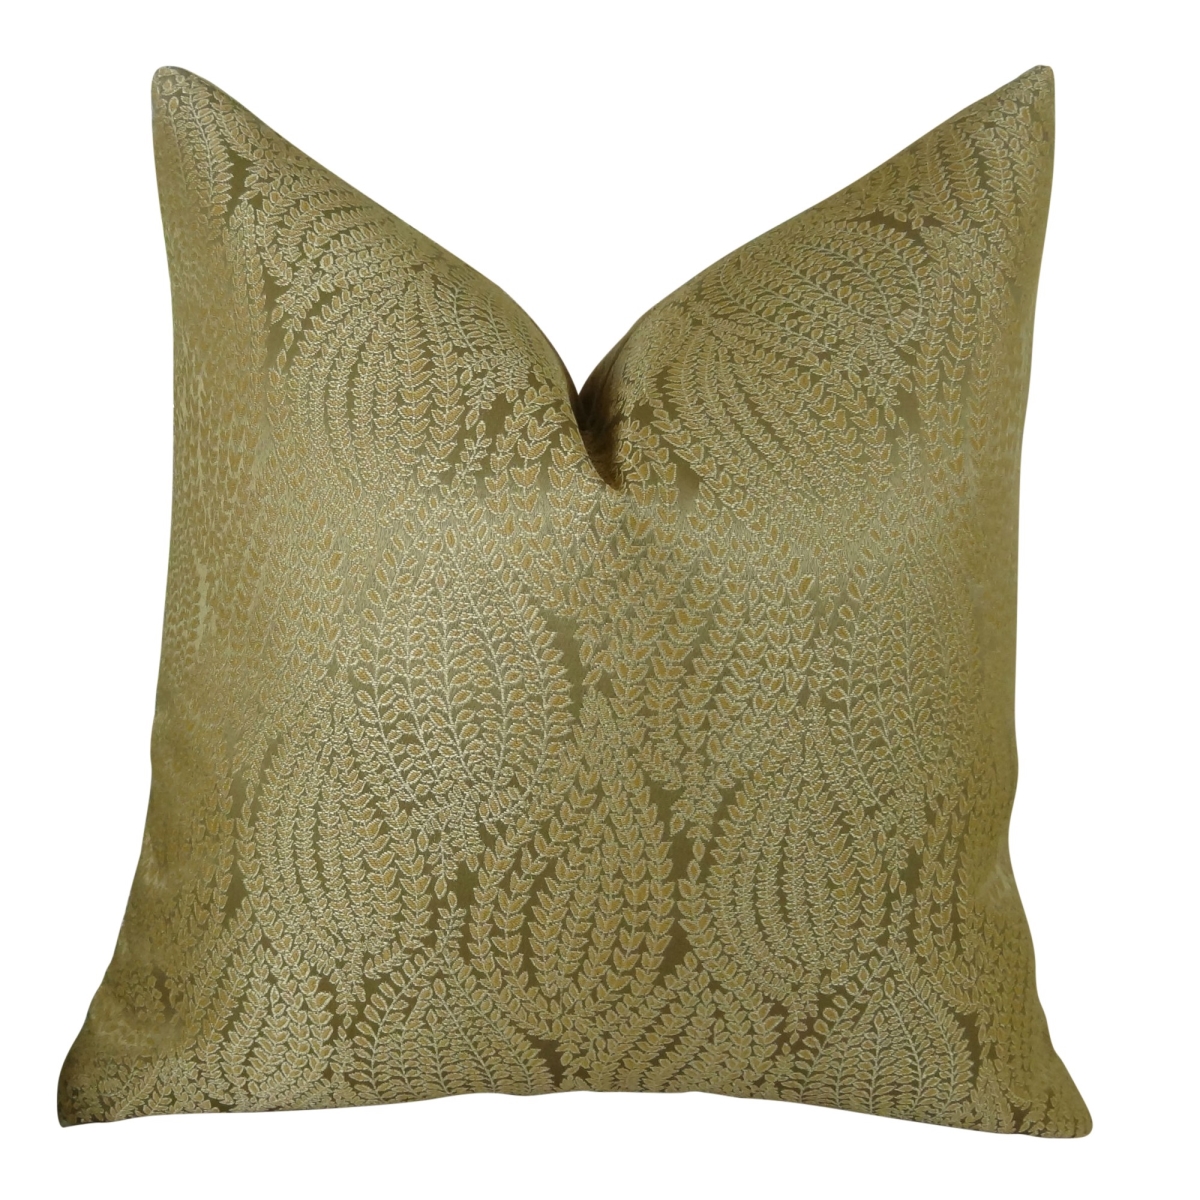 Pb11015-1616-dp Leaf Pod Handmade Double Sided Throw Pillow, Gold - 16 X 16 In.